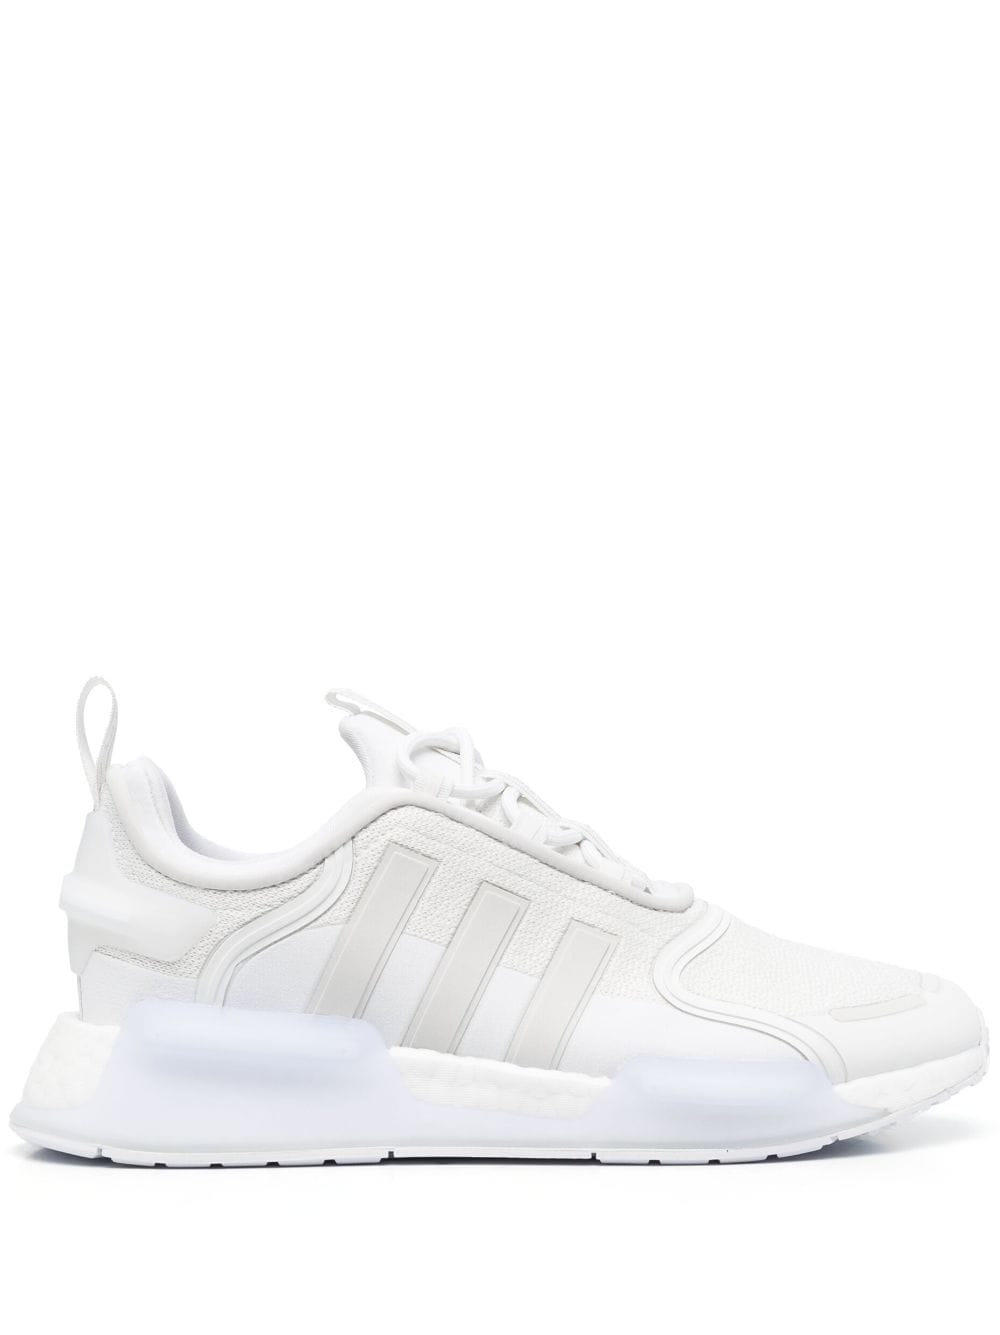 Adidas Originals Nmd_v3 Low-top Sneakers In Weiss